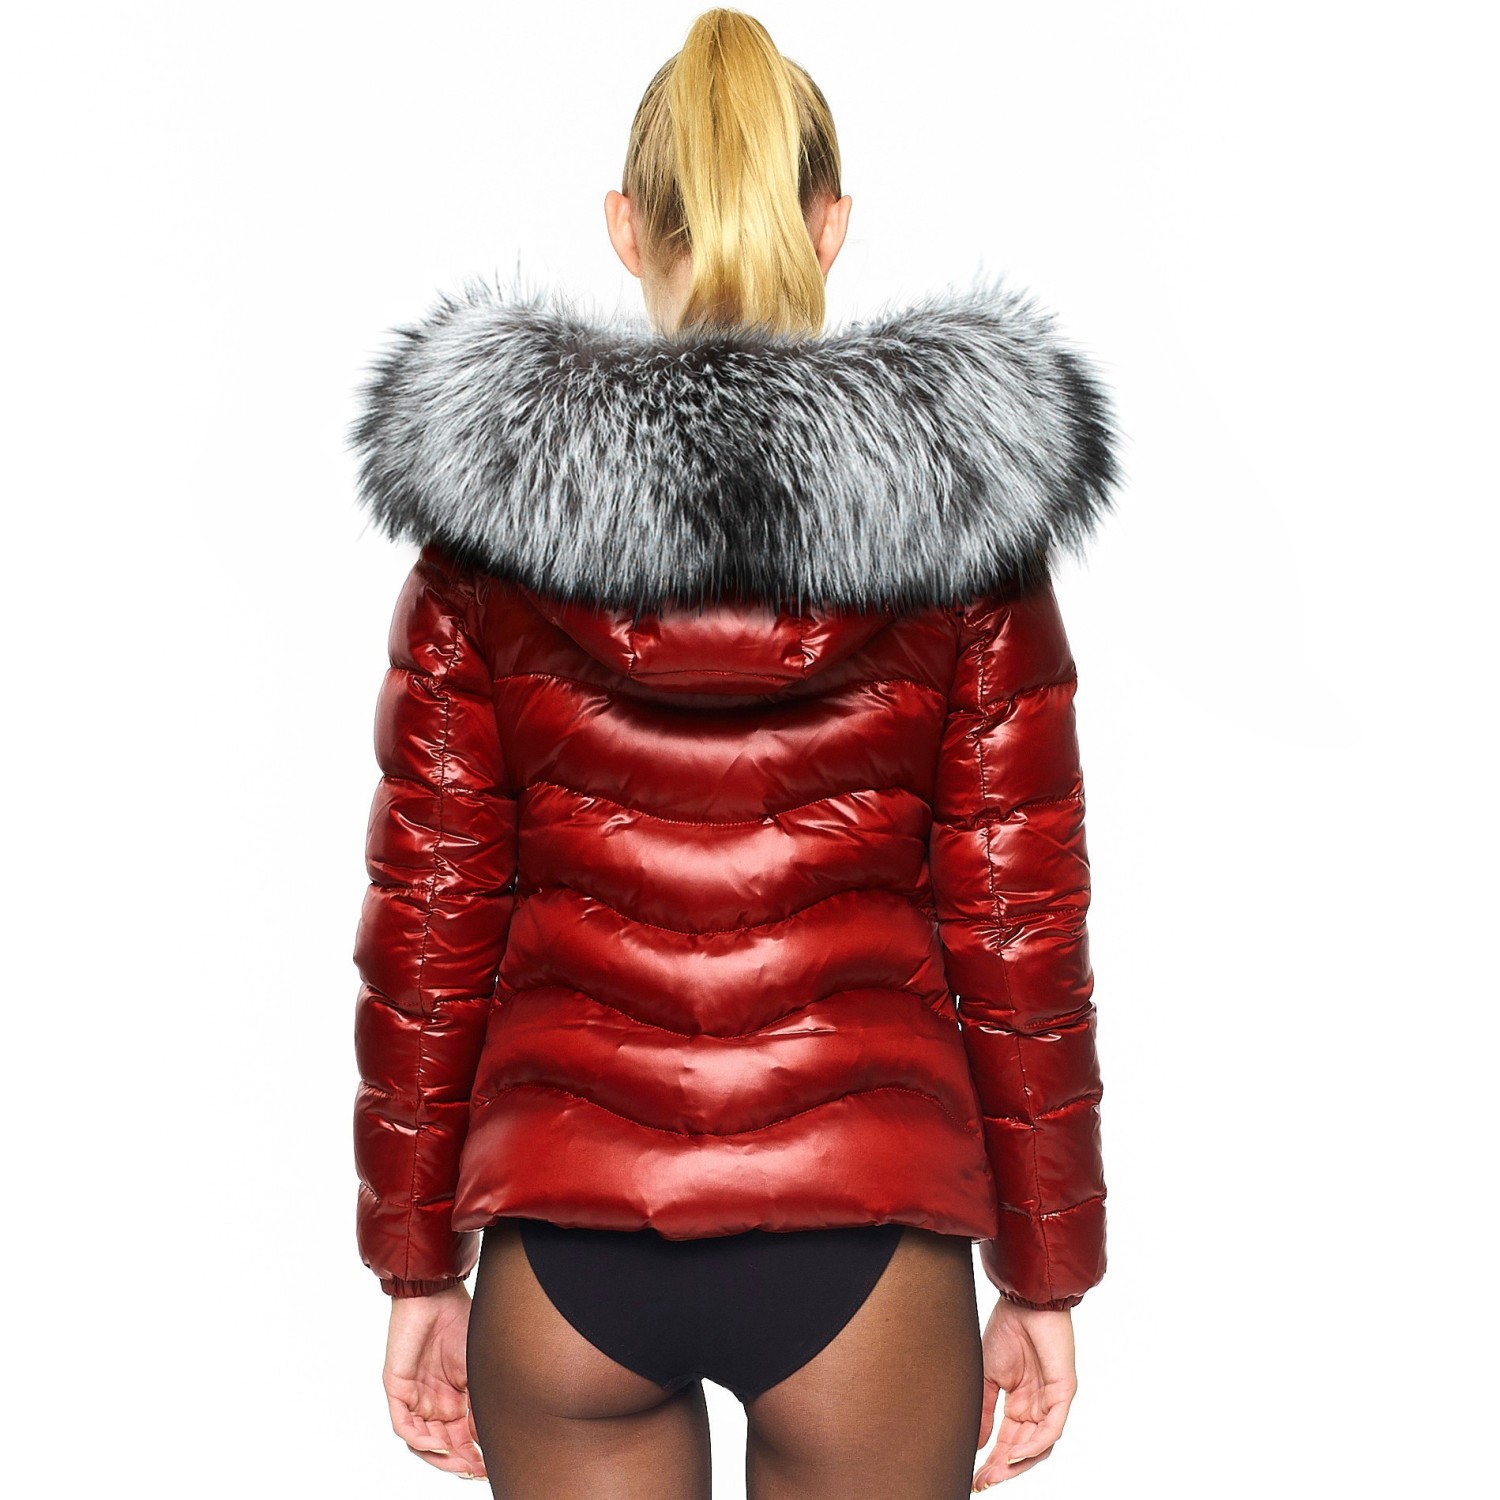 Puffer jacket with fur hood